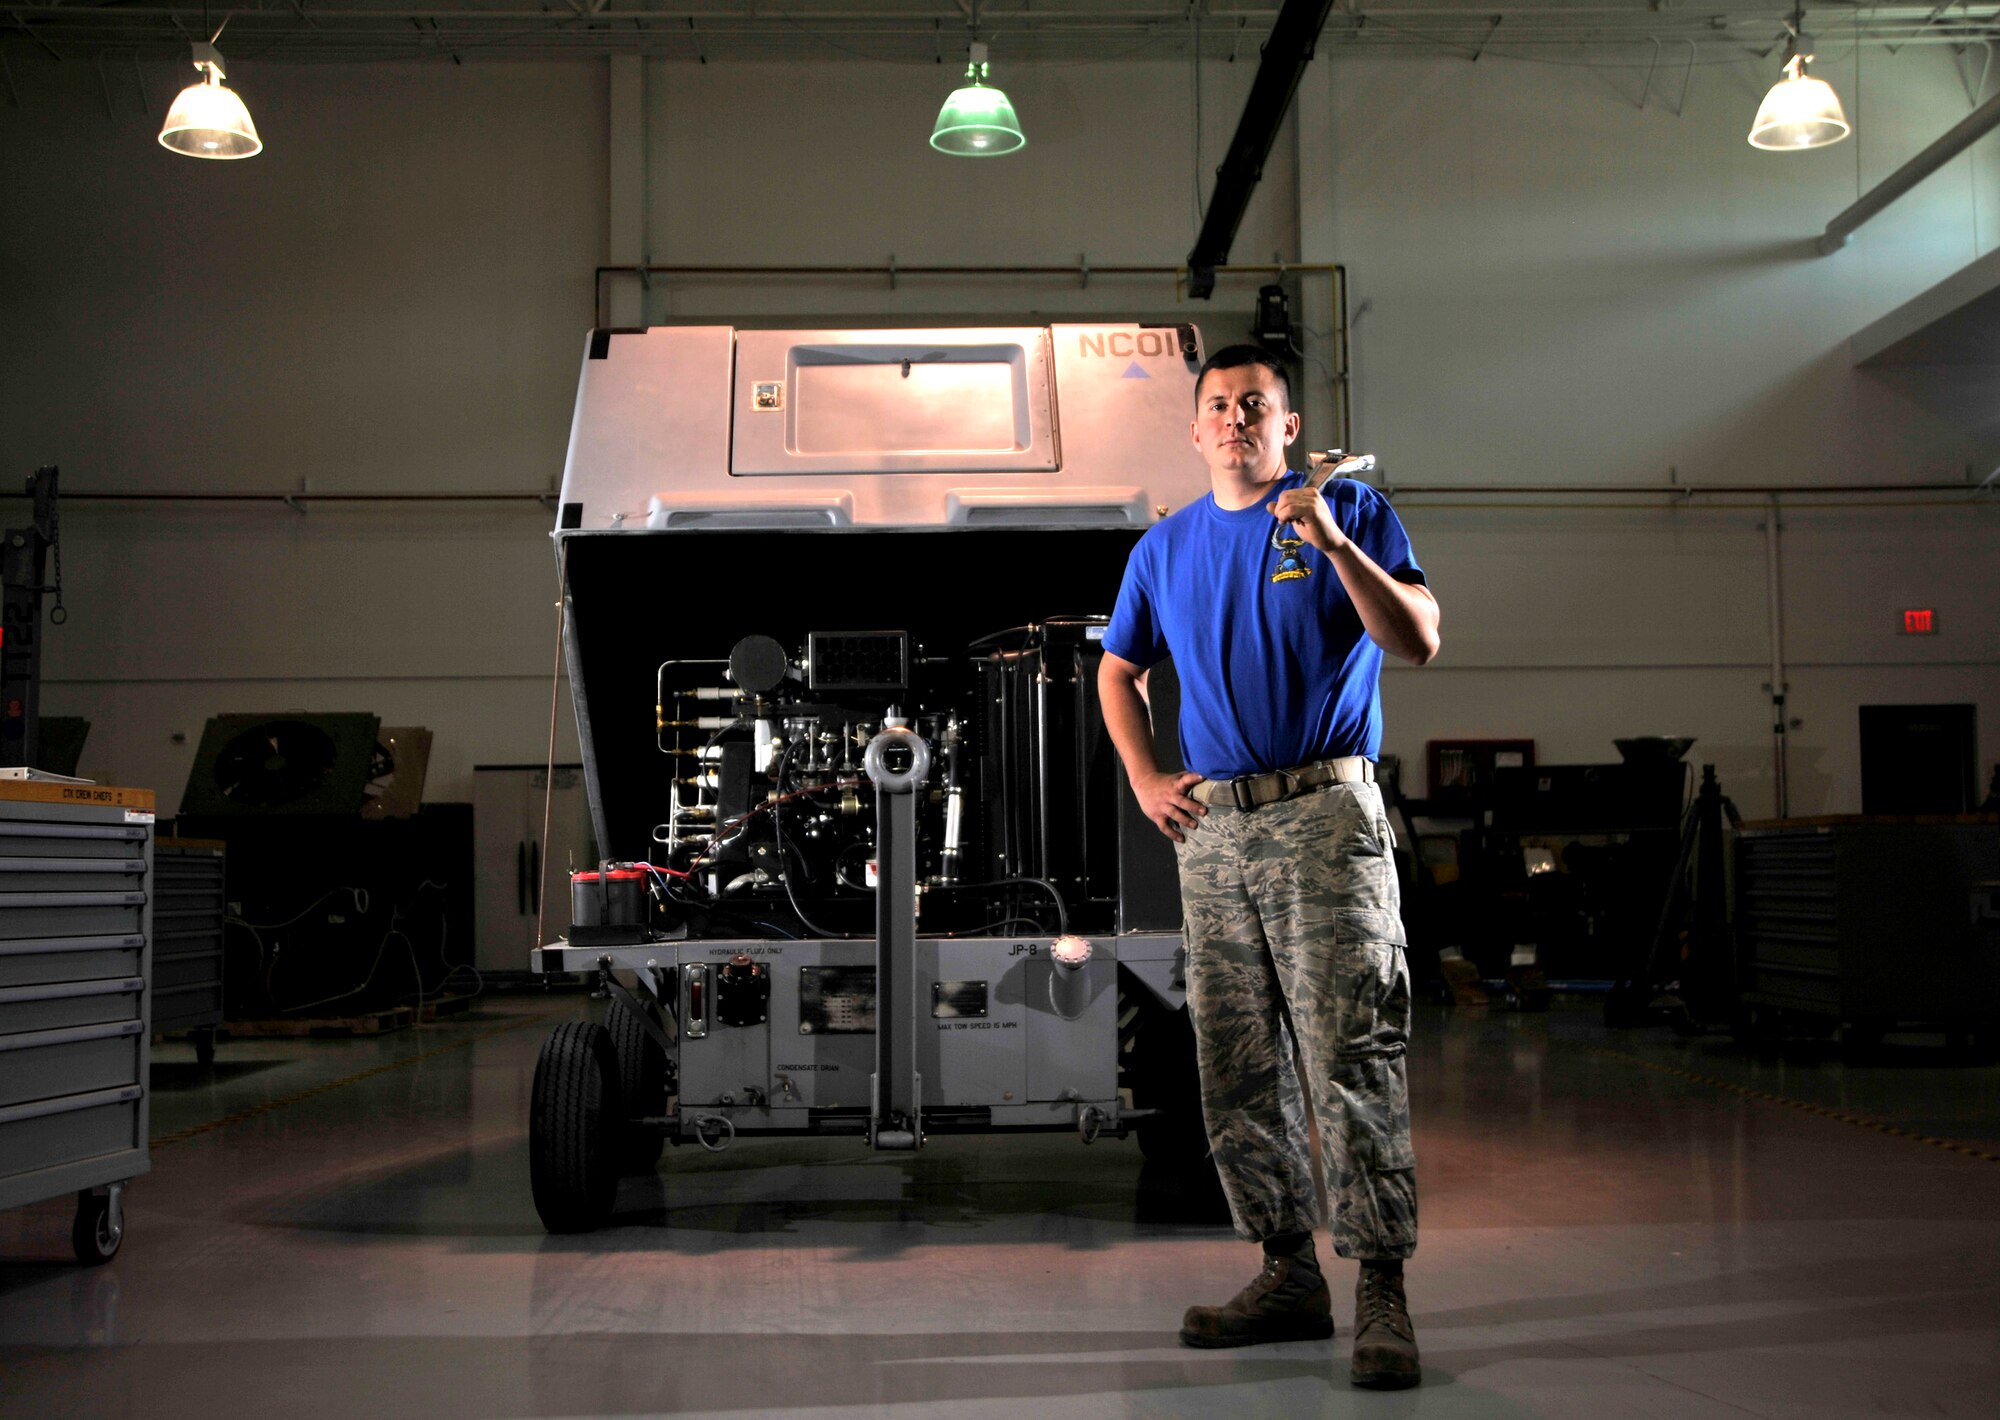 Tech Sgt. Kasey Hollinger, a 432nd Maintenance Squadron aerospace ground equipment craftsman, stands next to a self-generating nitrogen cart May 19, 2015, at Creech Air Force Base, Nev. The self-generating nitrogen cart is used to separate the nitrogen from the oxygen in the air and compresses it to be used to inflate AGE equipment and aircraft tires. (U.S. Air Force photo/Senior Airman Adarius Petty)